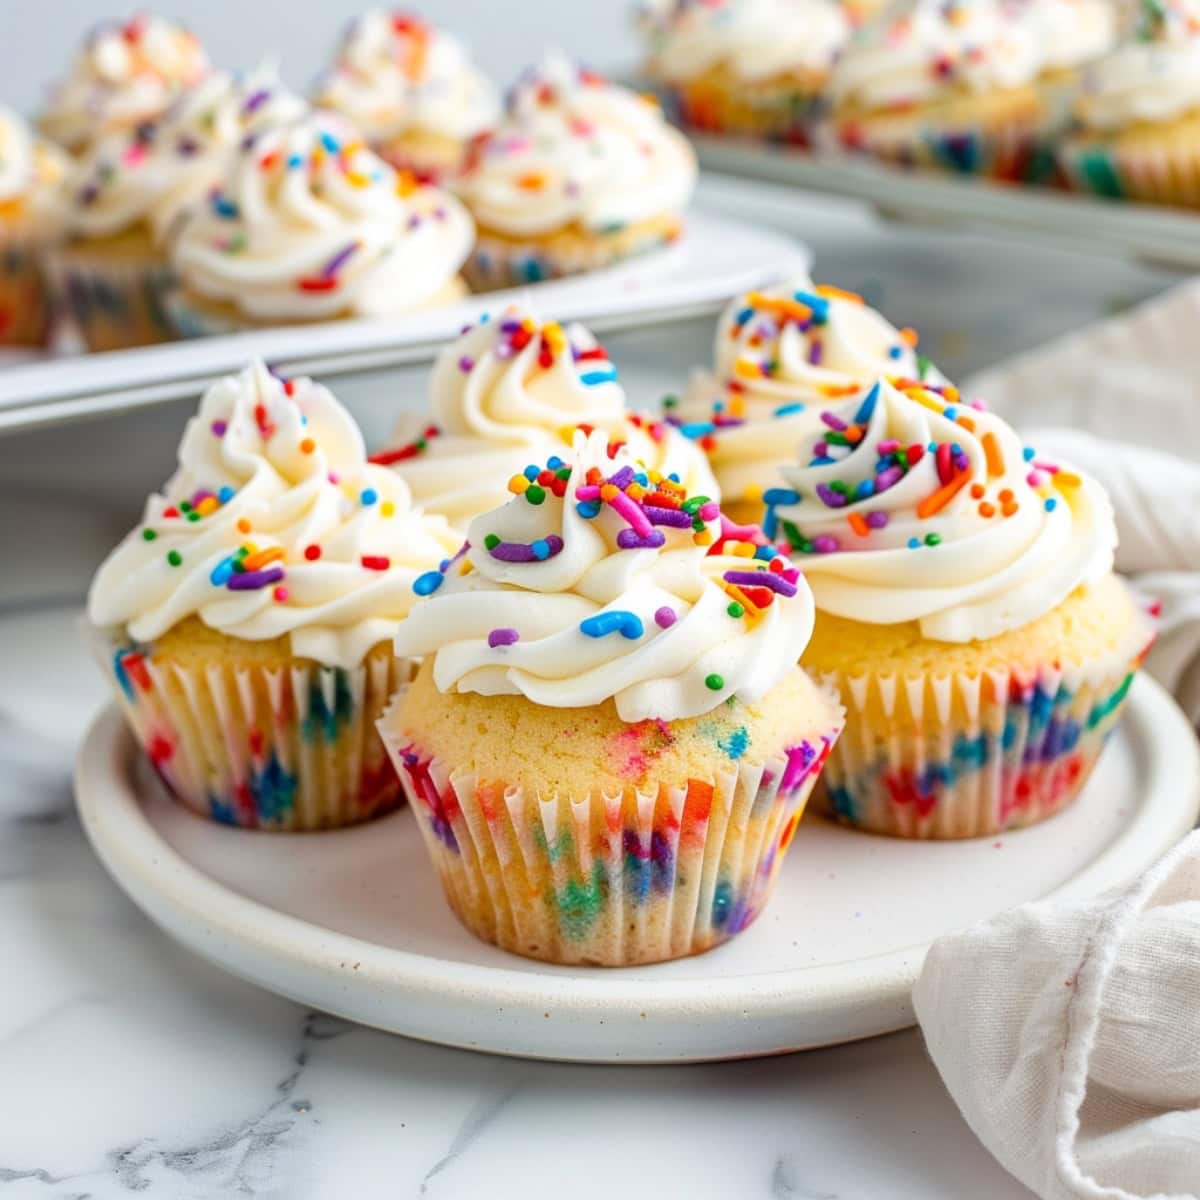 Homemade funfetti cupcakes, baked to perfection and crowned with a generous dollop of frosting.